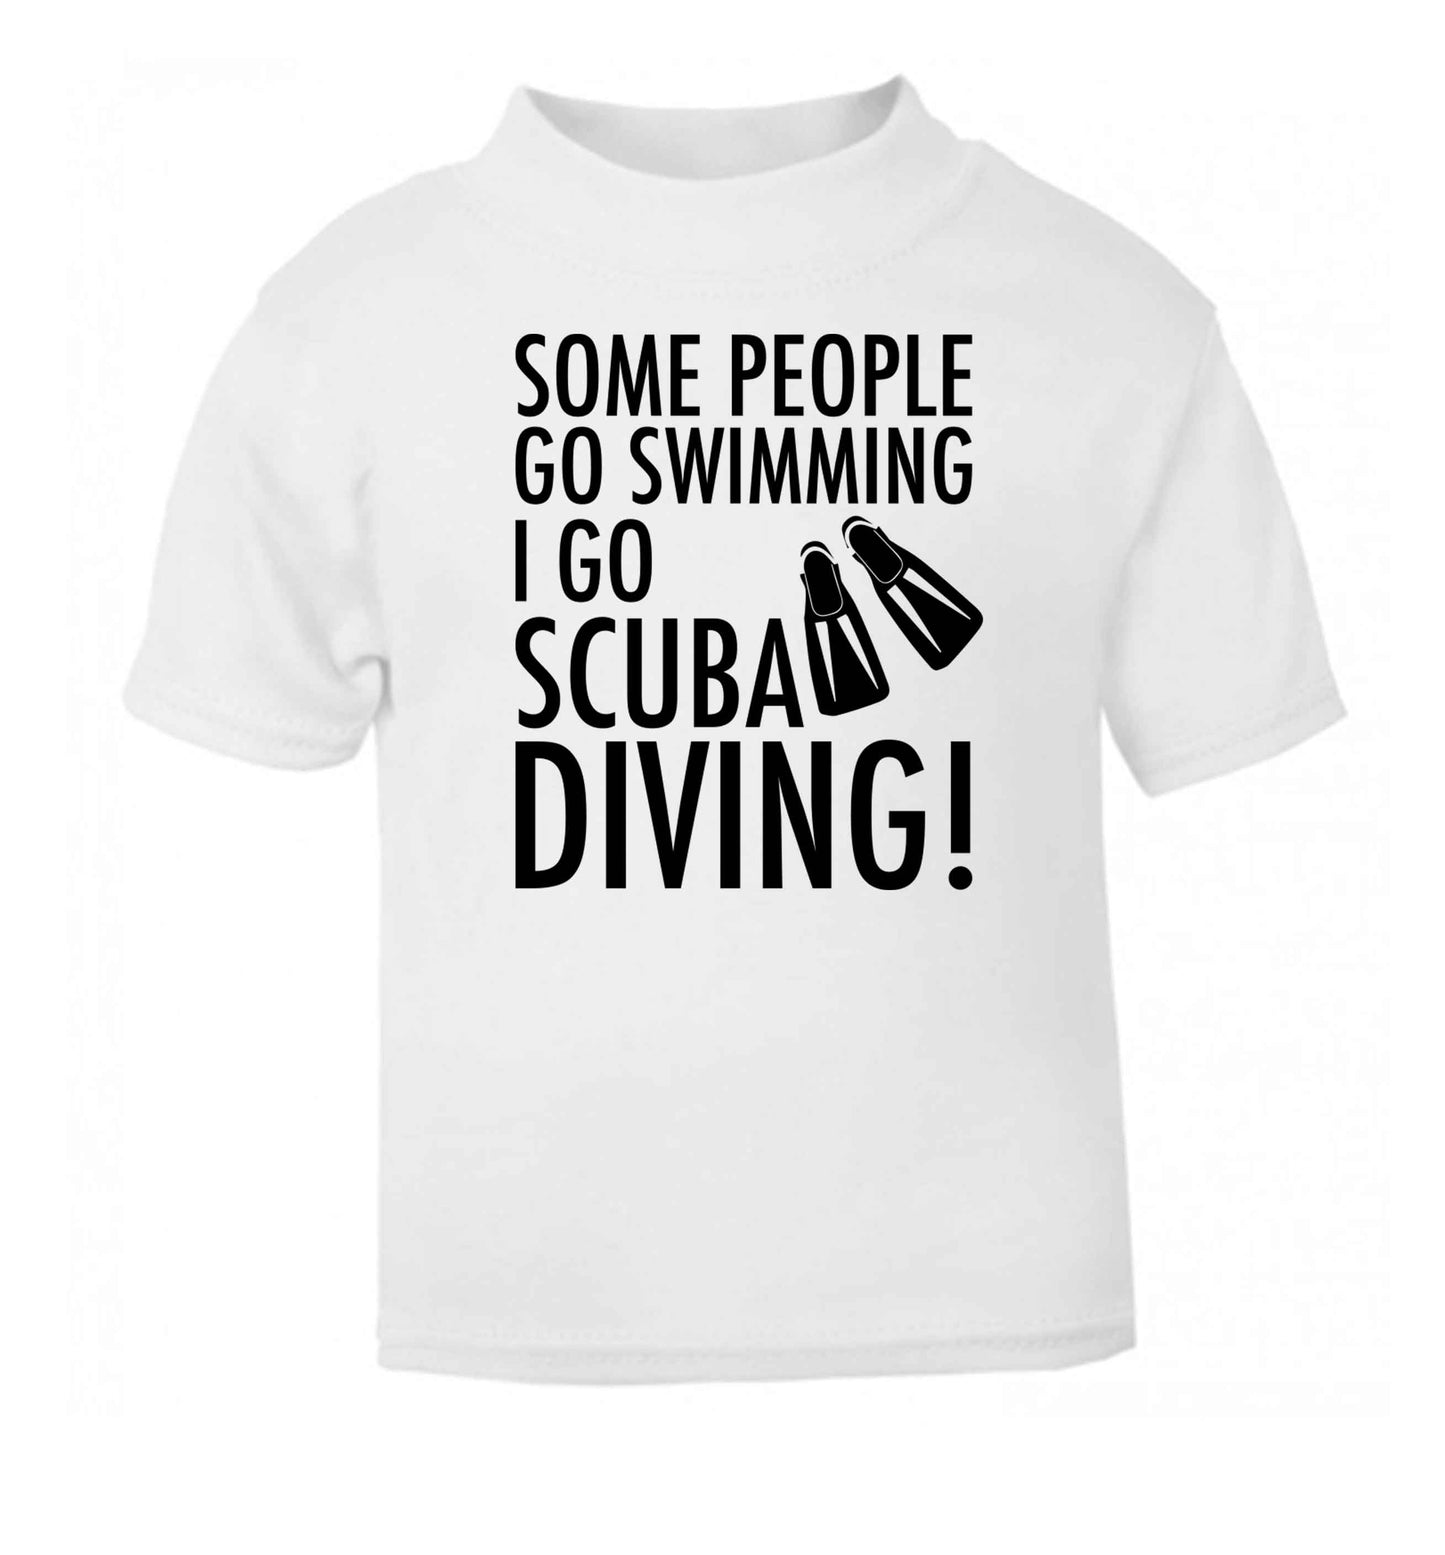 Some people go swimming I go scuba diving! white Baby Toddler Tshirt 2 Years